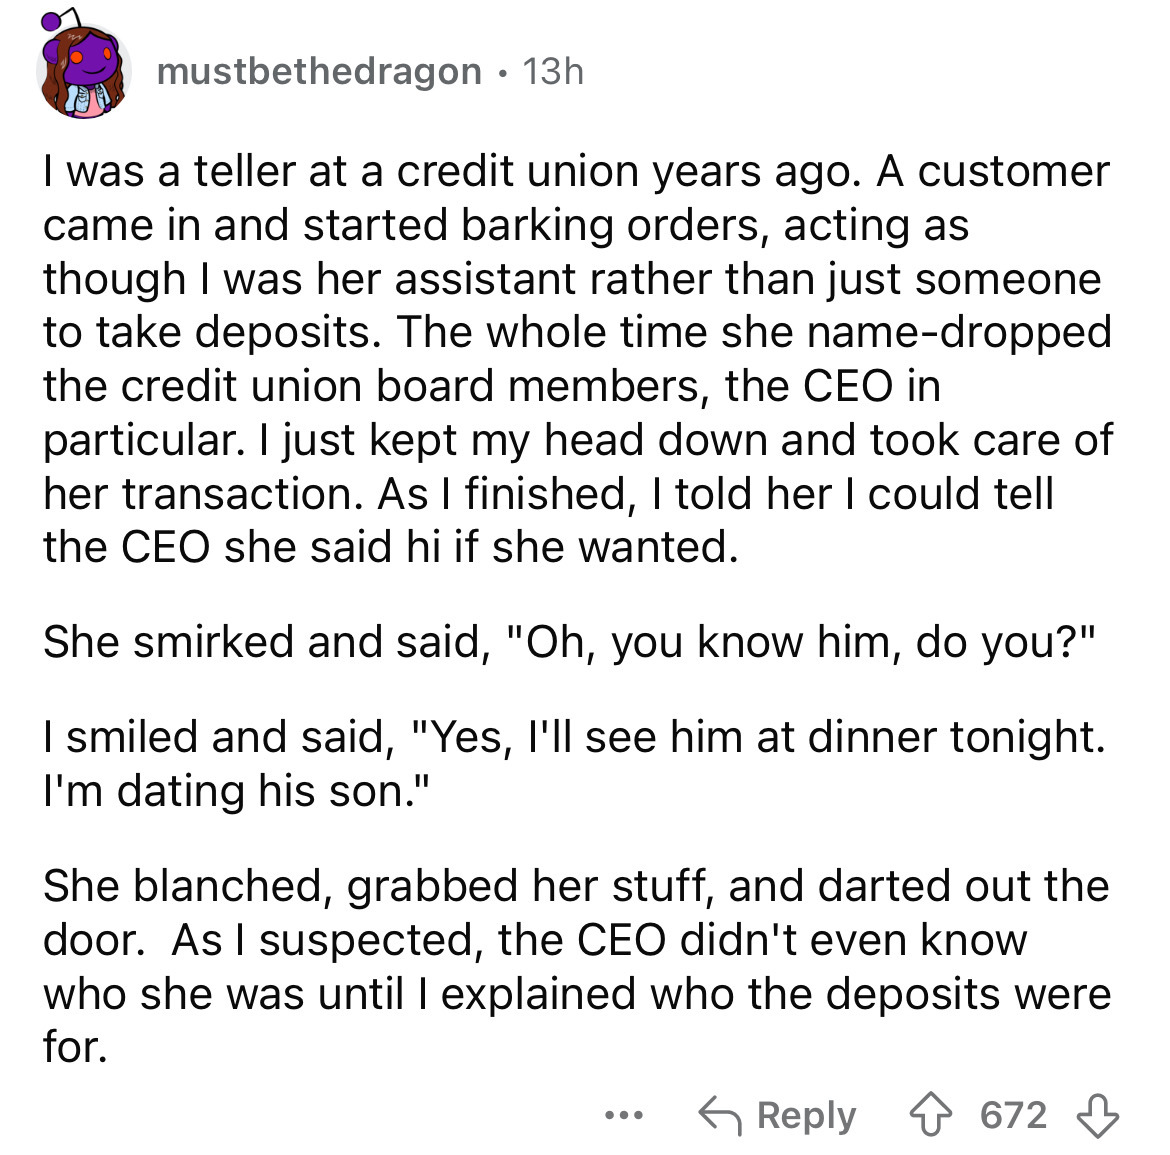 document - mustbethedragon 13h . I was a teller at a credit union years ago. A customer came in and started barking orders, acting as though I was her assistant rather than just someone to take deposits. The whole time she namedropped the credit union boa